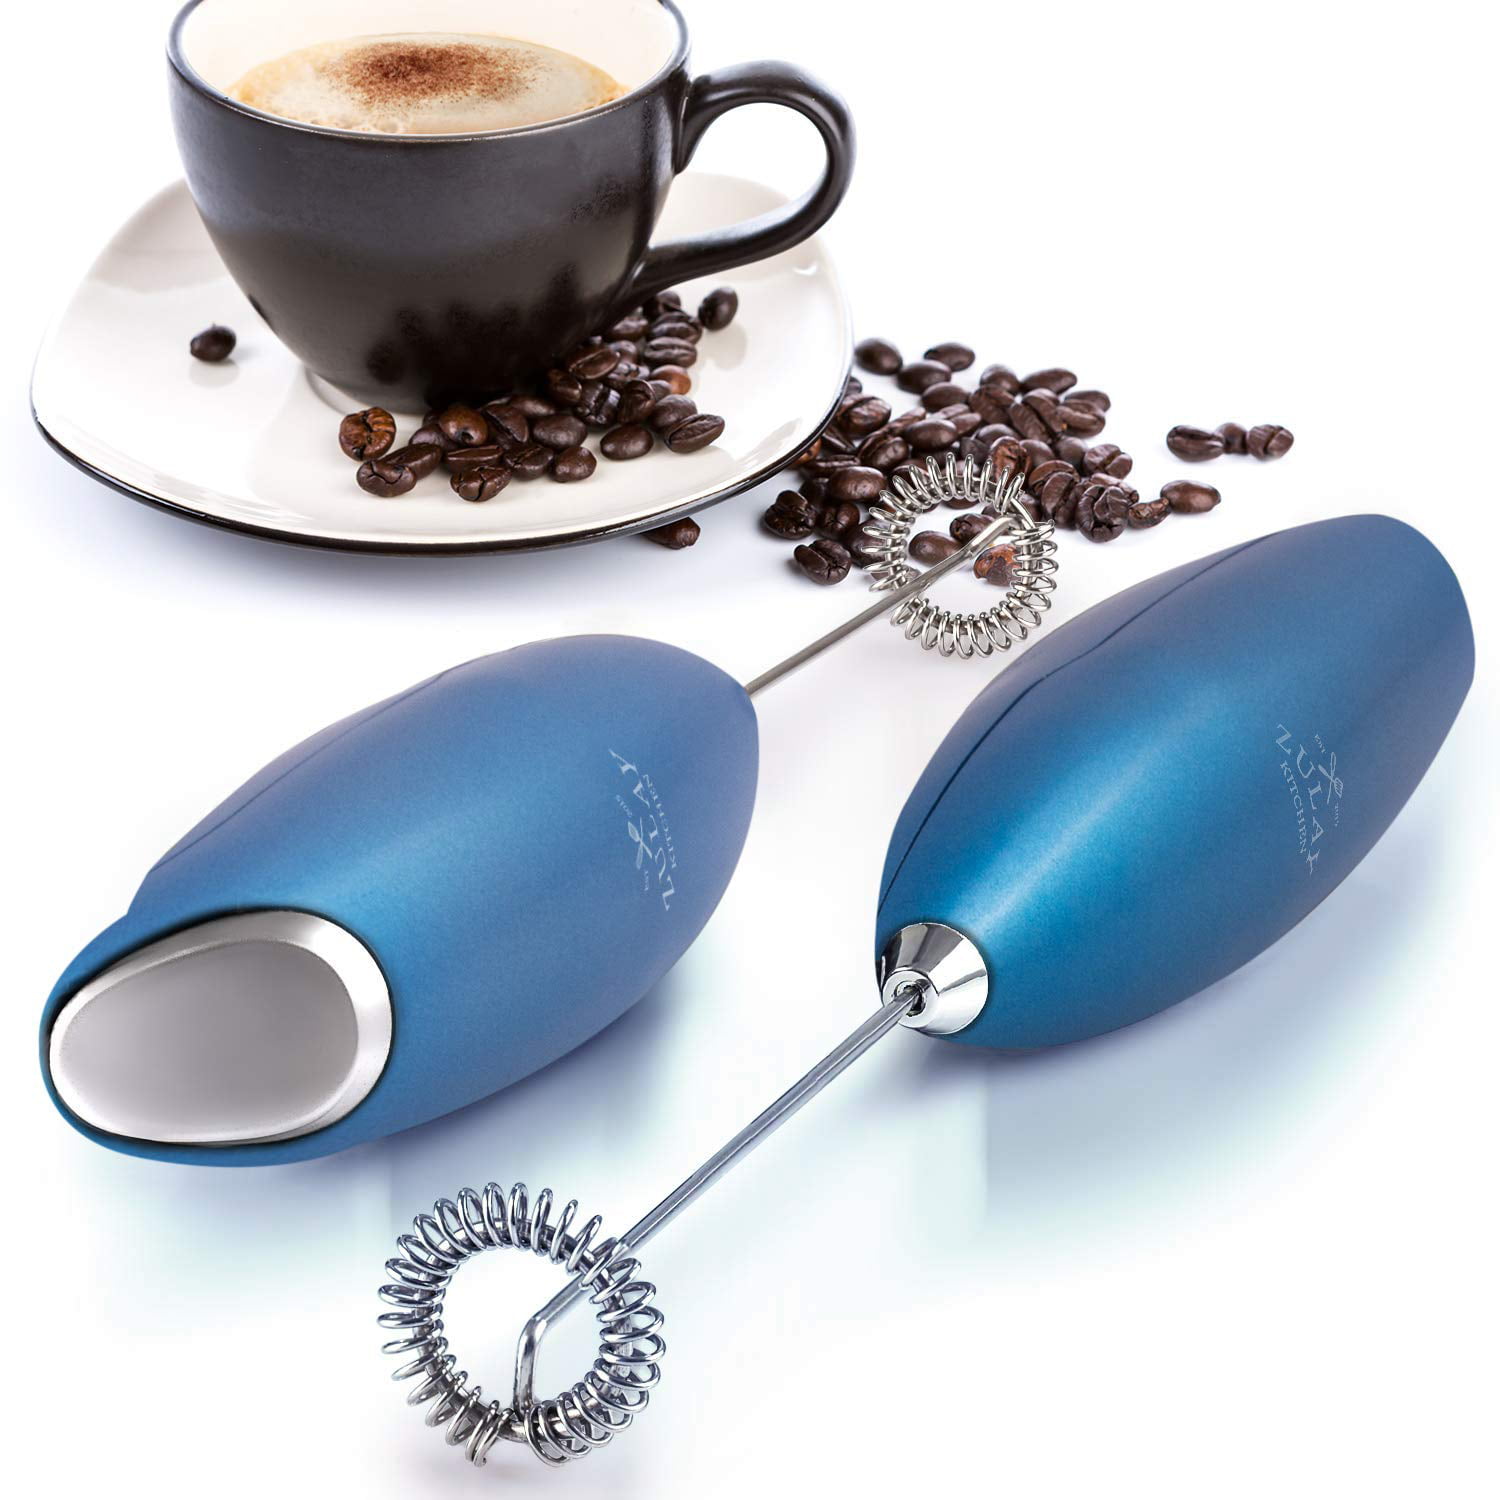 Zyliss Handheld Electric Milk Frother - Battery-Powered Frother for Coffee  - Create Hot or Cold Foam in Cappuccinos, Lattes, or Shakes - Perfect